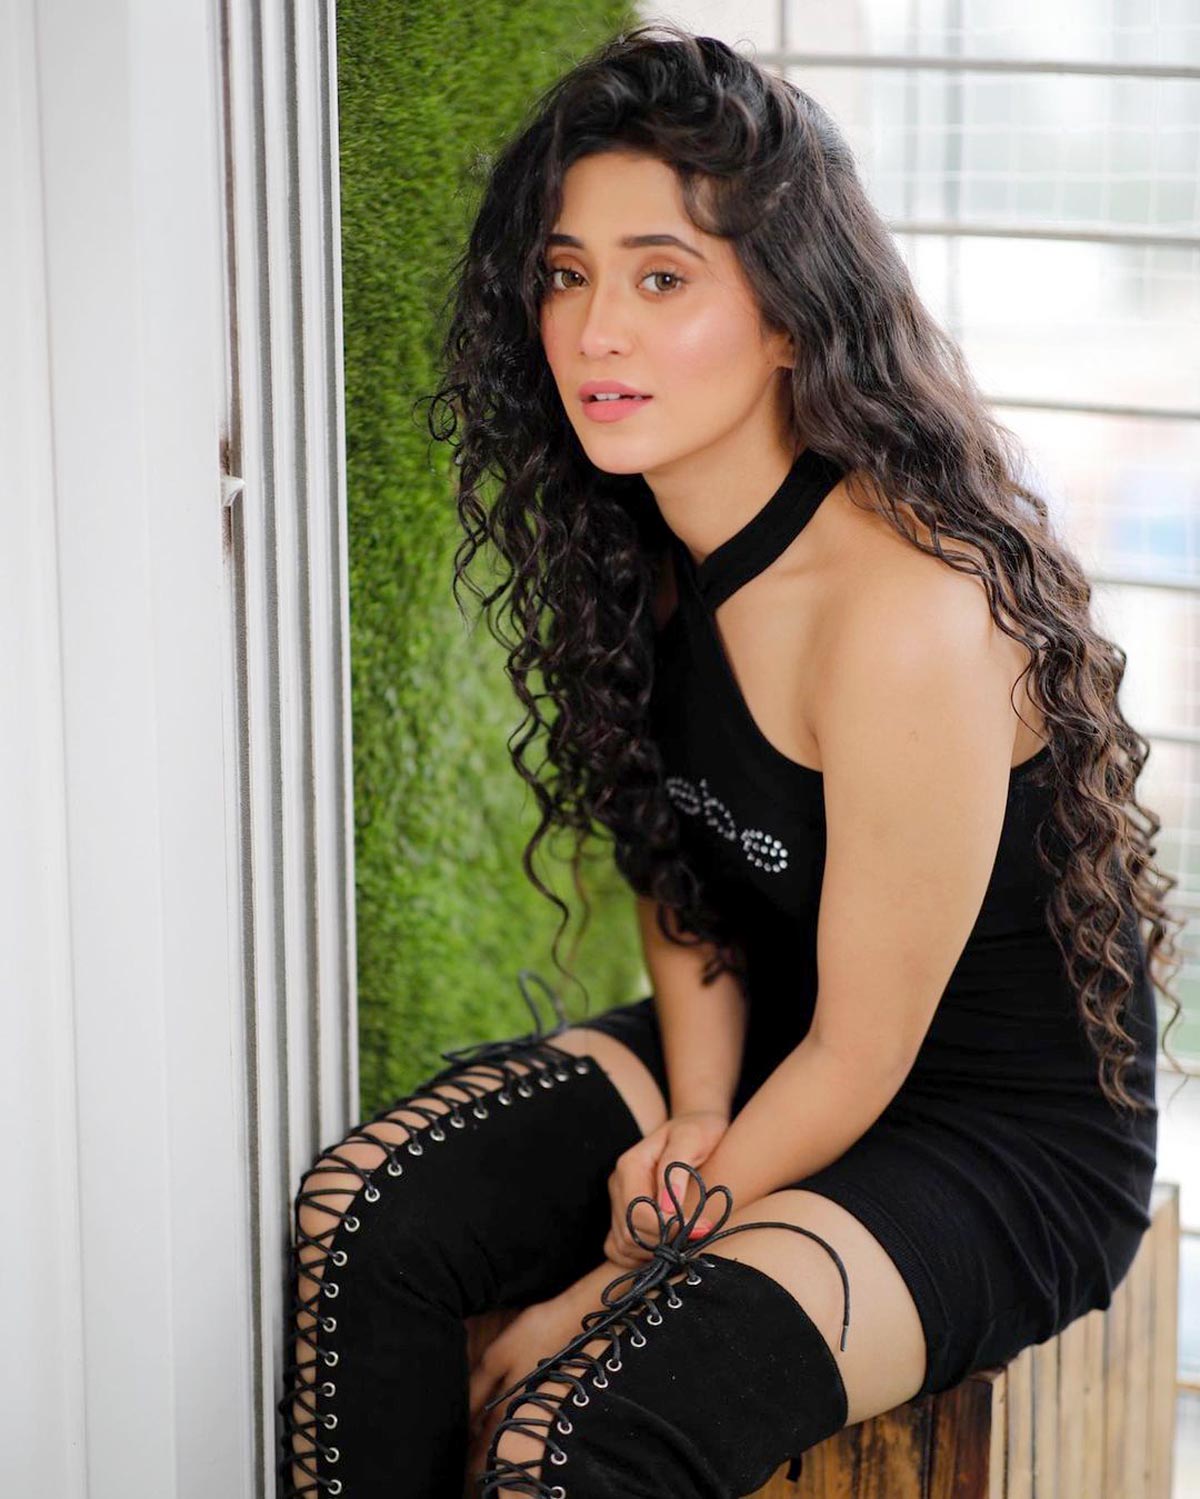 Take a look at Shivangi Joshi's Perfect Evening Gowns Collection